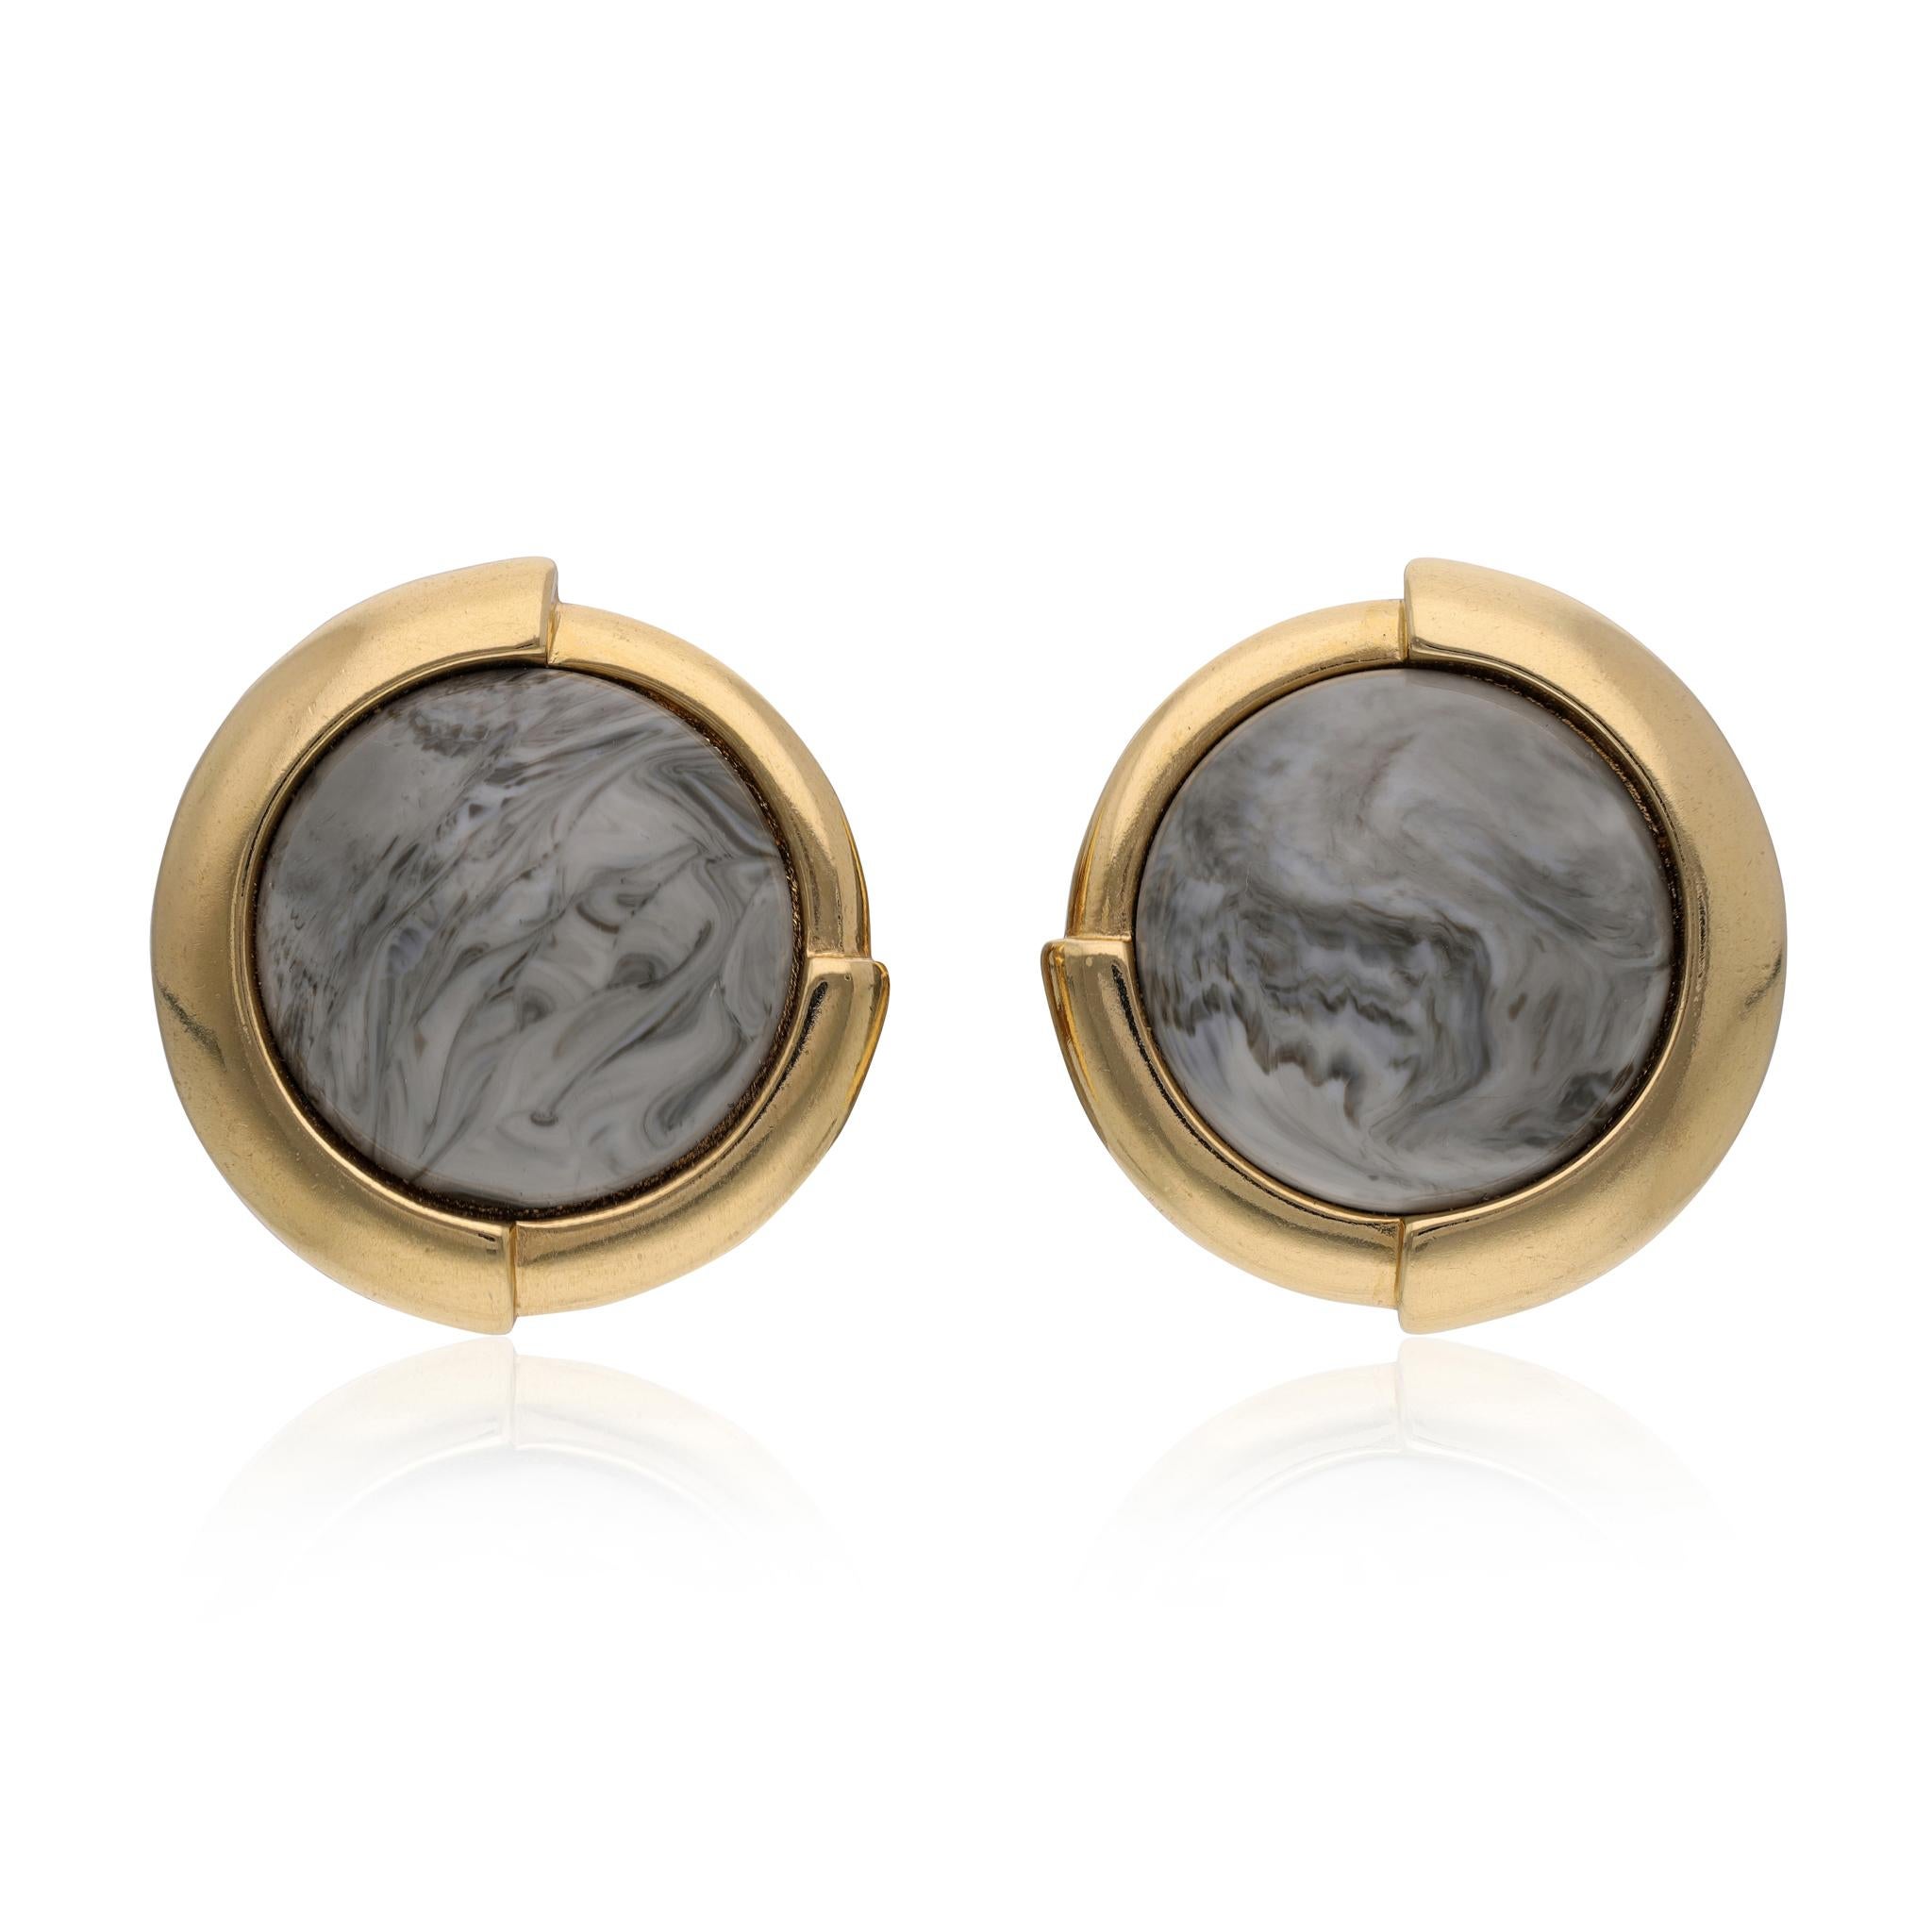 1980's Monet marbelised enamel ear clips, a stylish duo of eternal earrings that shimmer with individuality. A timeless pair of earrings that are sure to make a statement. These vintage Monet marbelised enamel ear clips capture a unique and chic